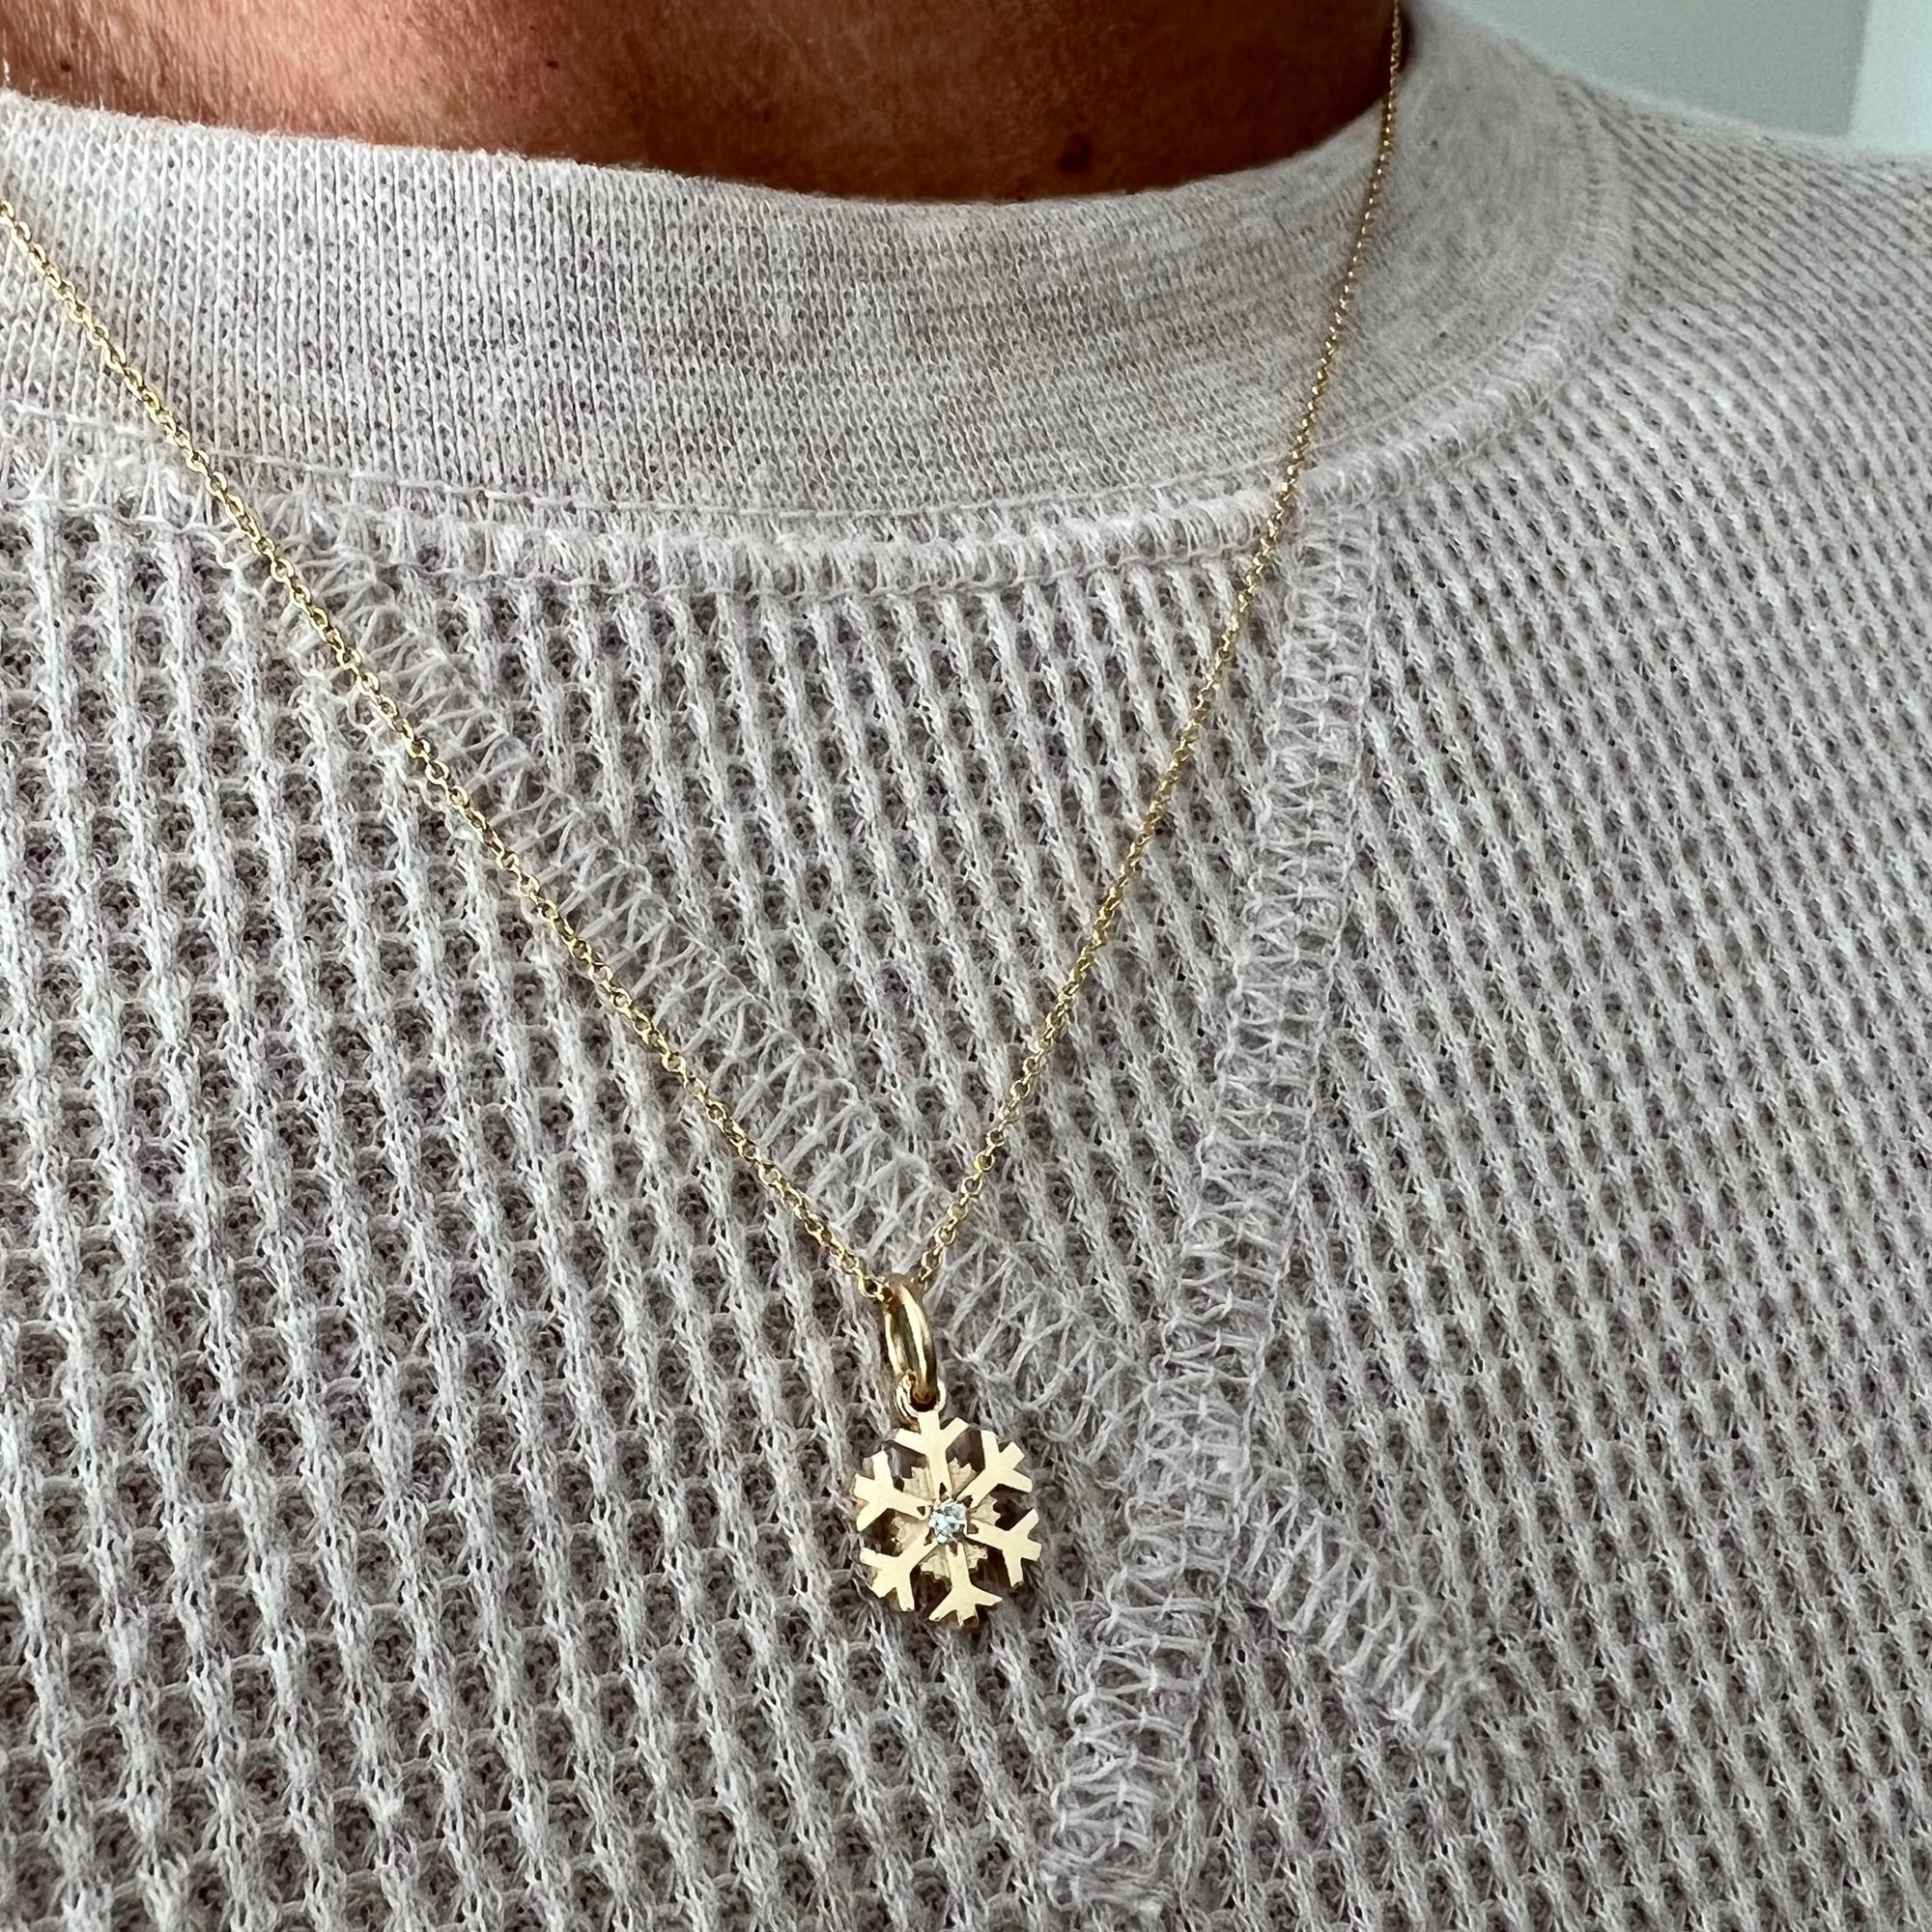 14k Gold Snowflake Pendant | Minimalist Necklace, Puffy Dainty/Large Pendant,  Winter Necklace, Bridesmaid Gift, Christmas Gift, Gift for Her